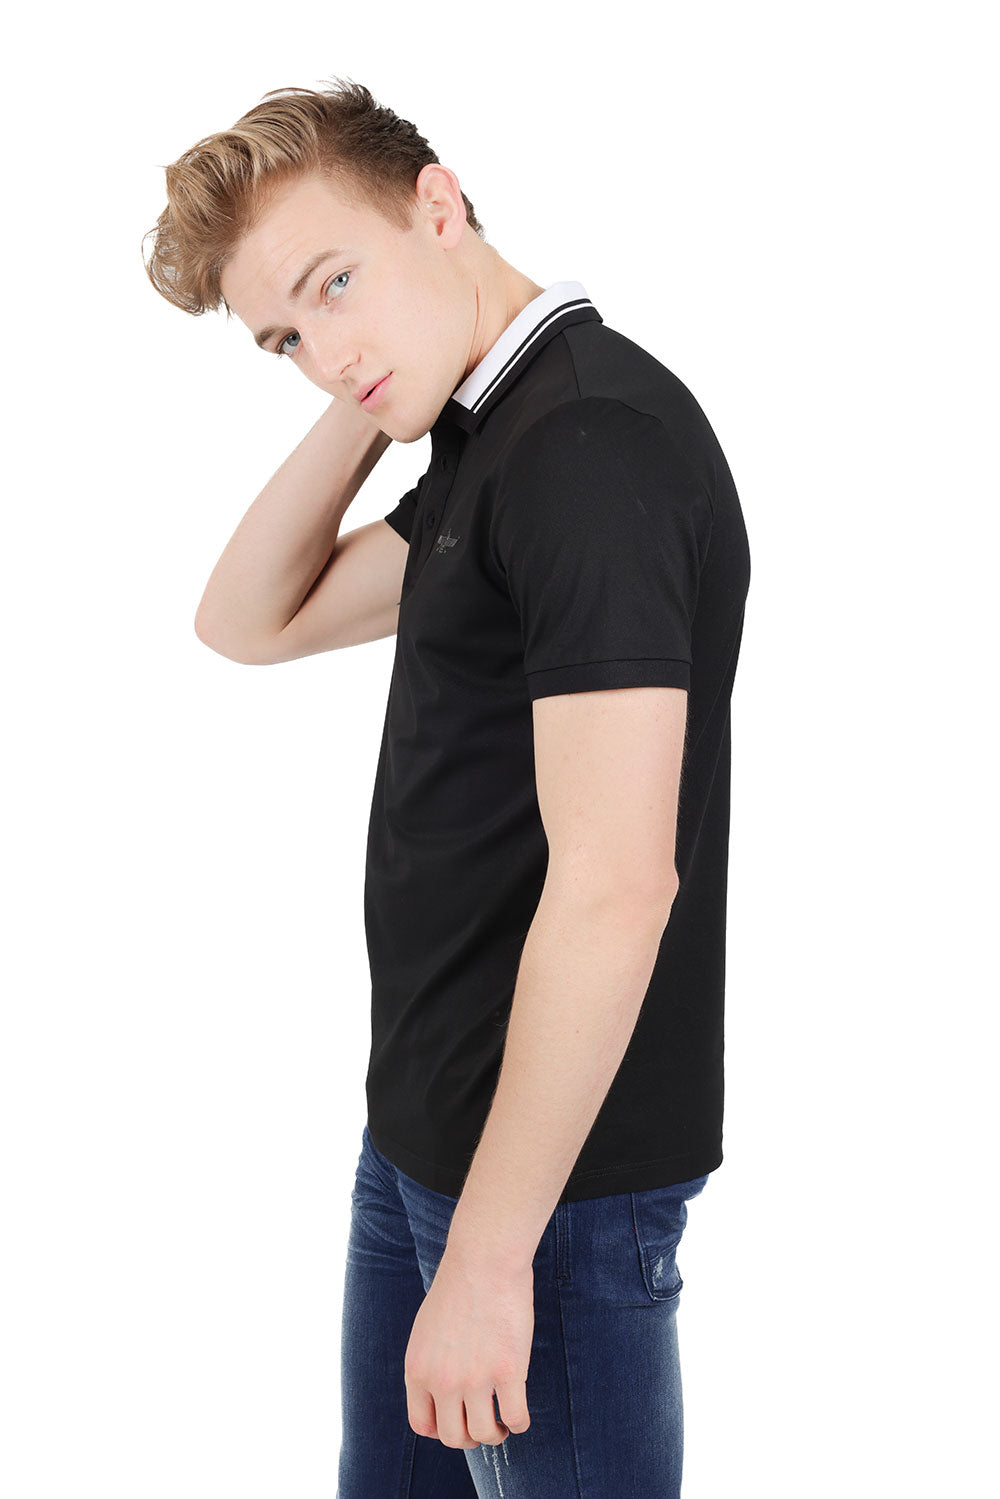 Barabas Men's Solid Color Luxury Short Sleeves Polo Shirts PP824 Black